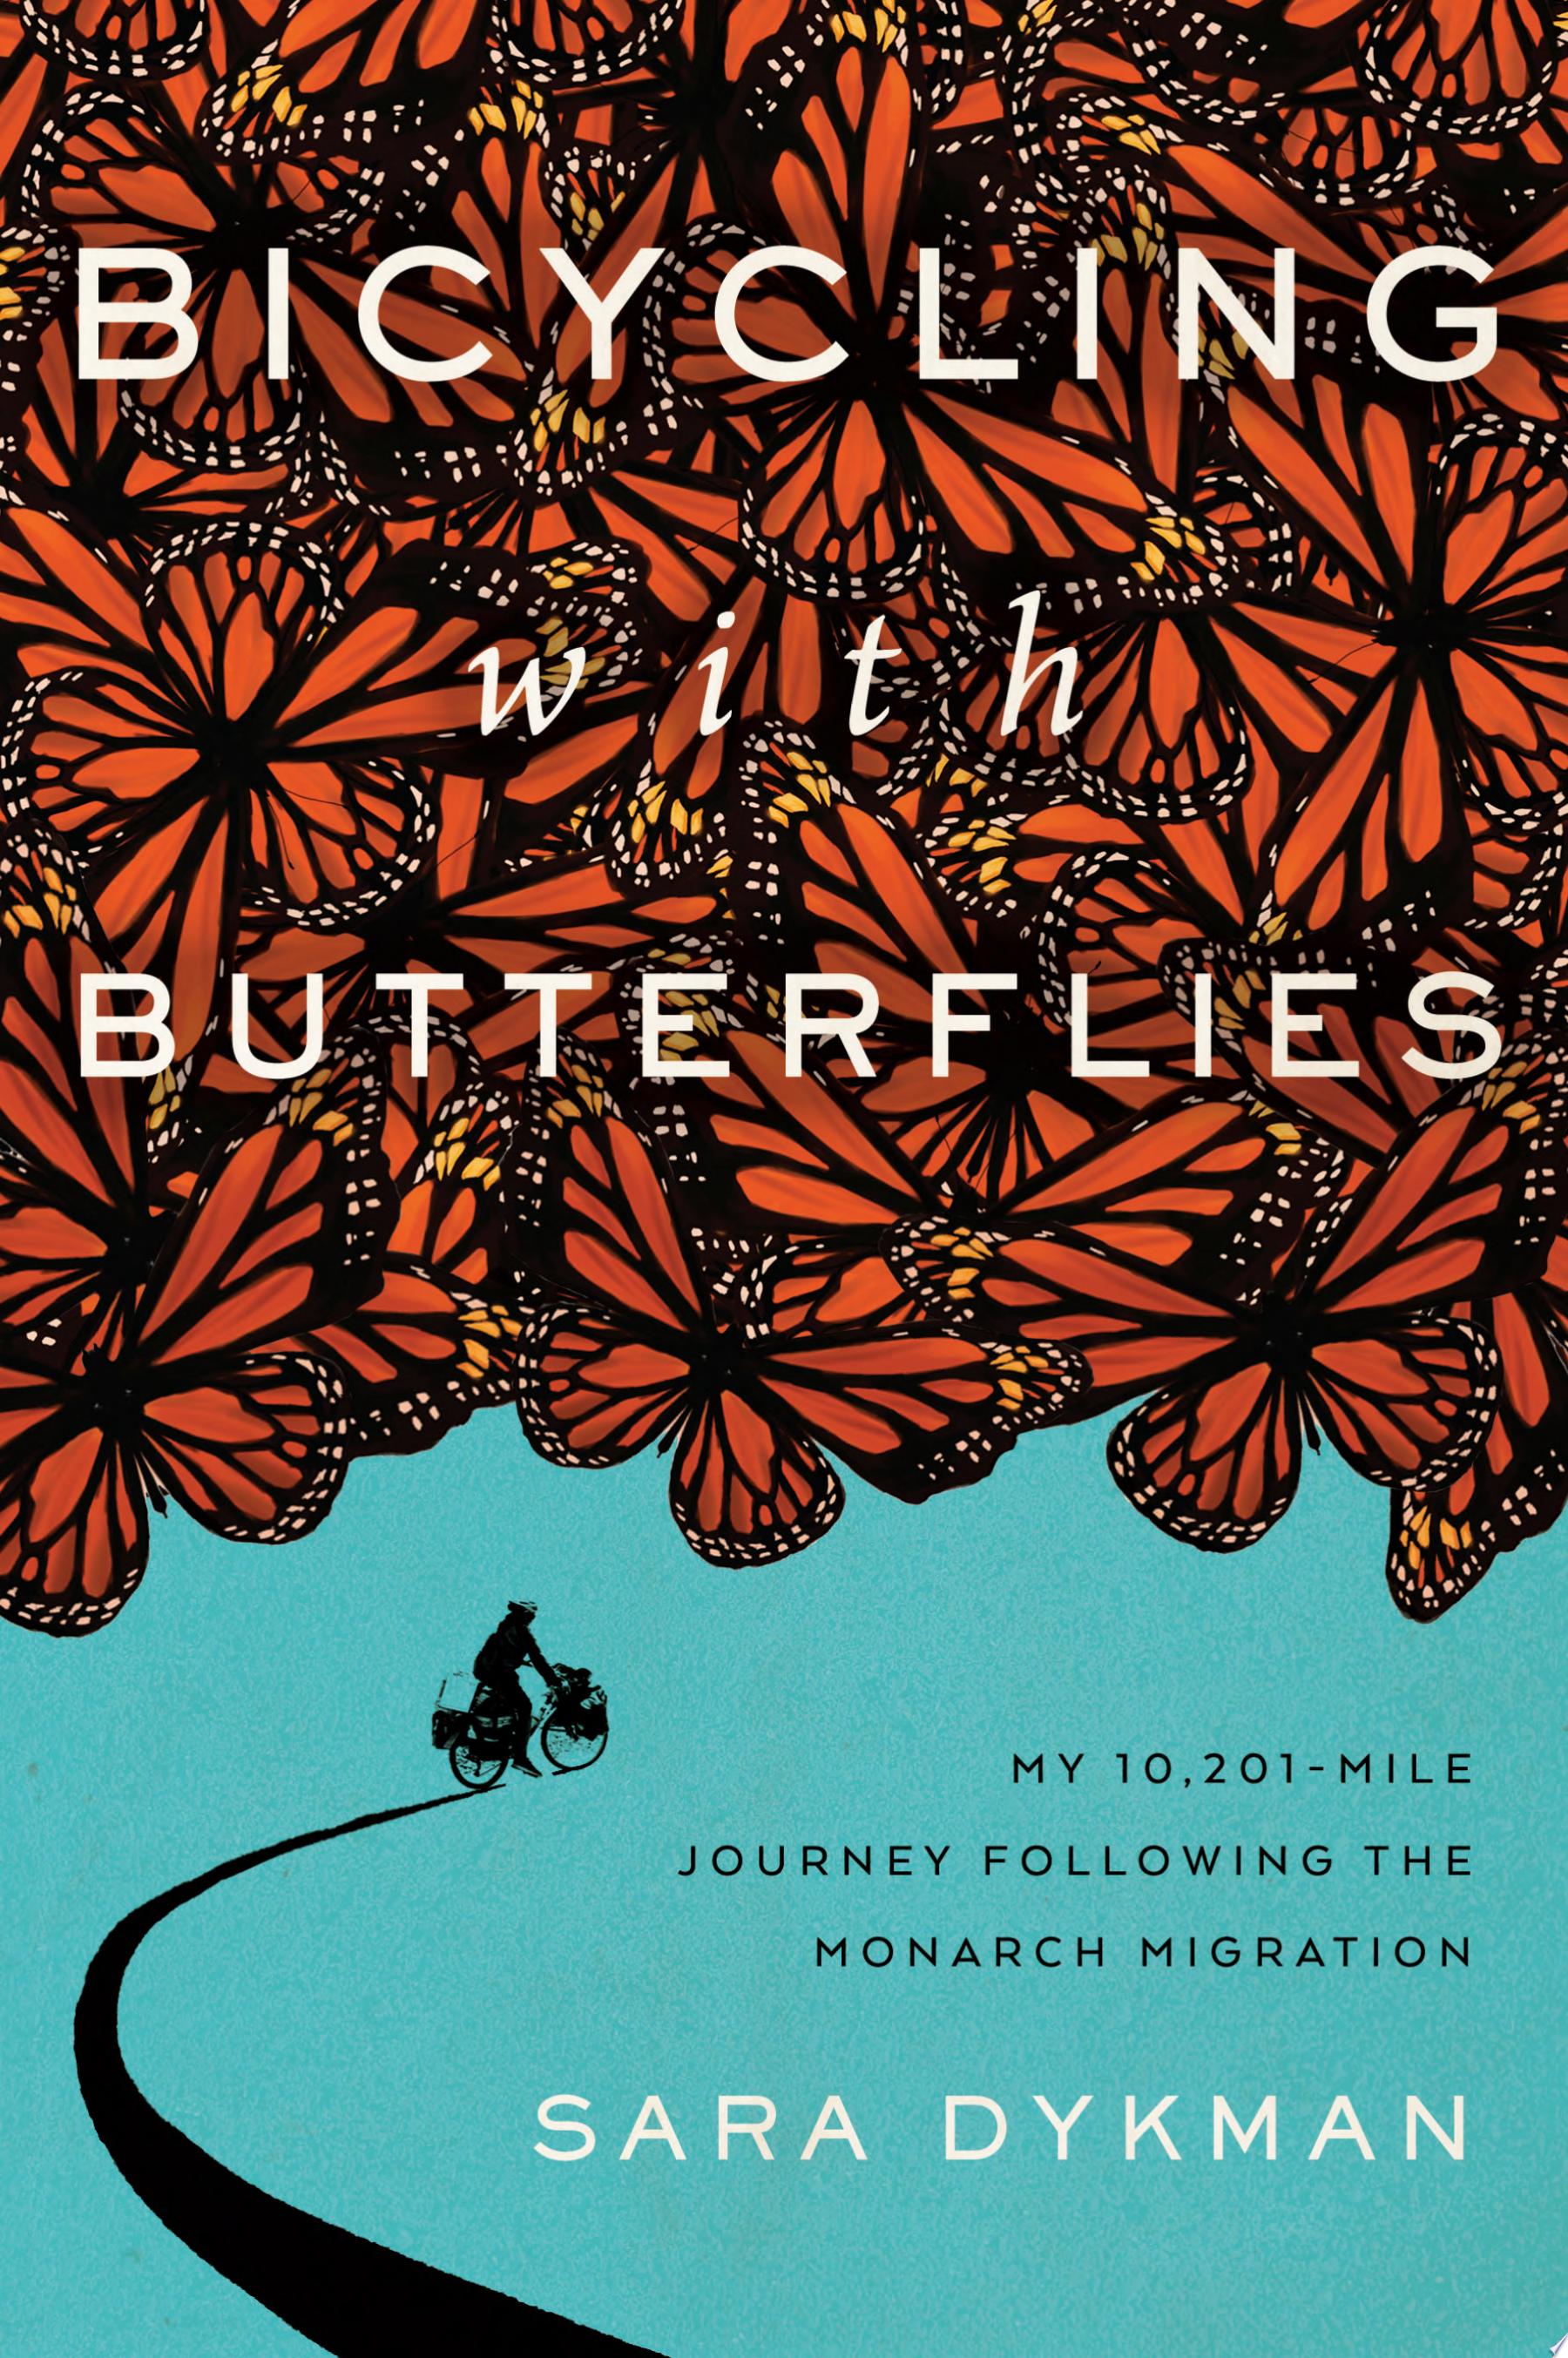 Image for "Bicycling with Butterflies"